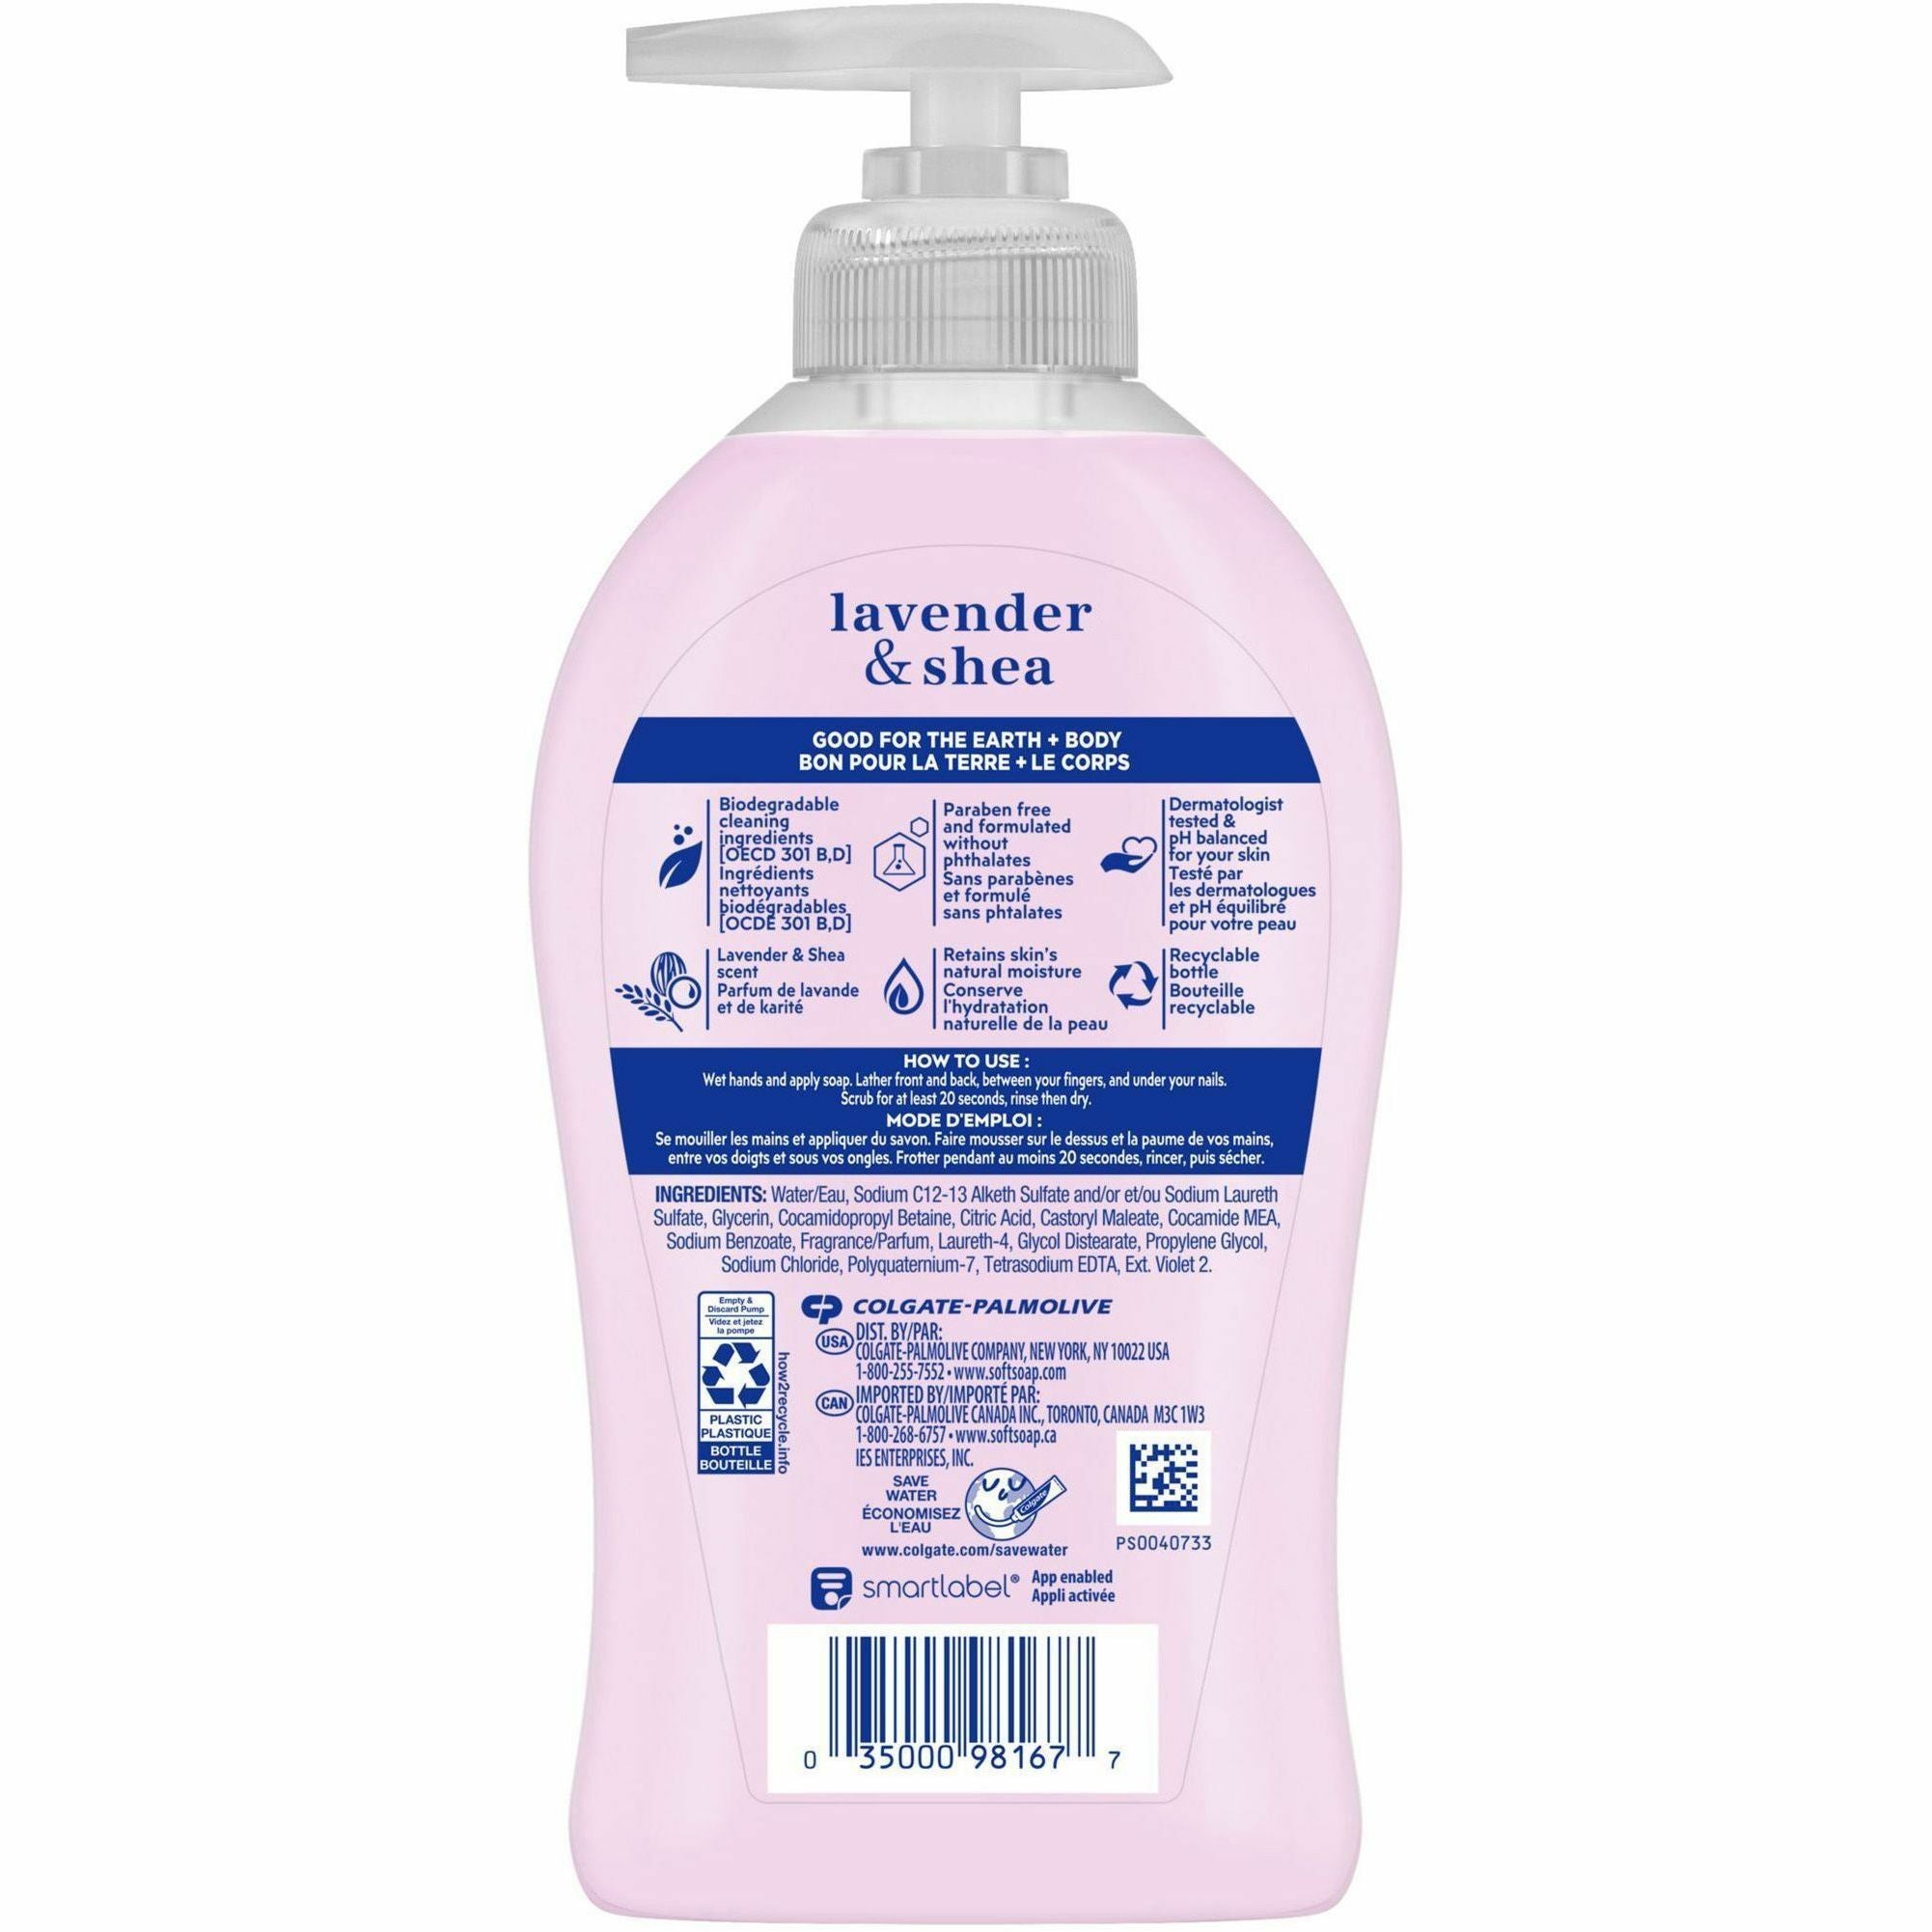 softsoap-lavender-hand-soap-lavender-&-shea-butter-scentfor-113-fl-oz-3327-ml-pump-bottle-dispenser-bacteria-remover-dirt-remover-hand-skin-moisturizing-purple-refillable-recyclable-paraben-free-phthalate-free-biodegradable_cpcus07058a - 3